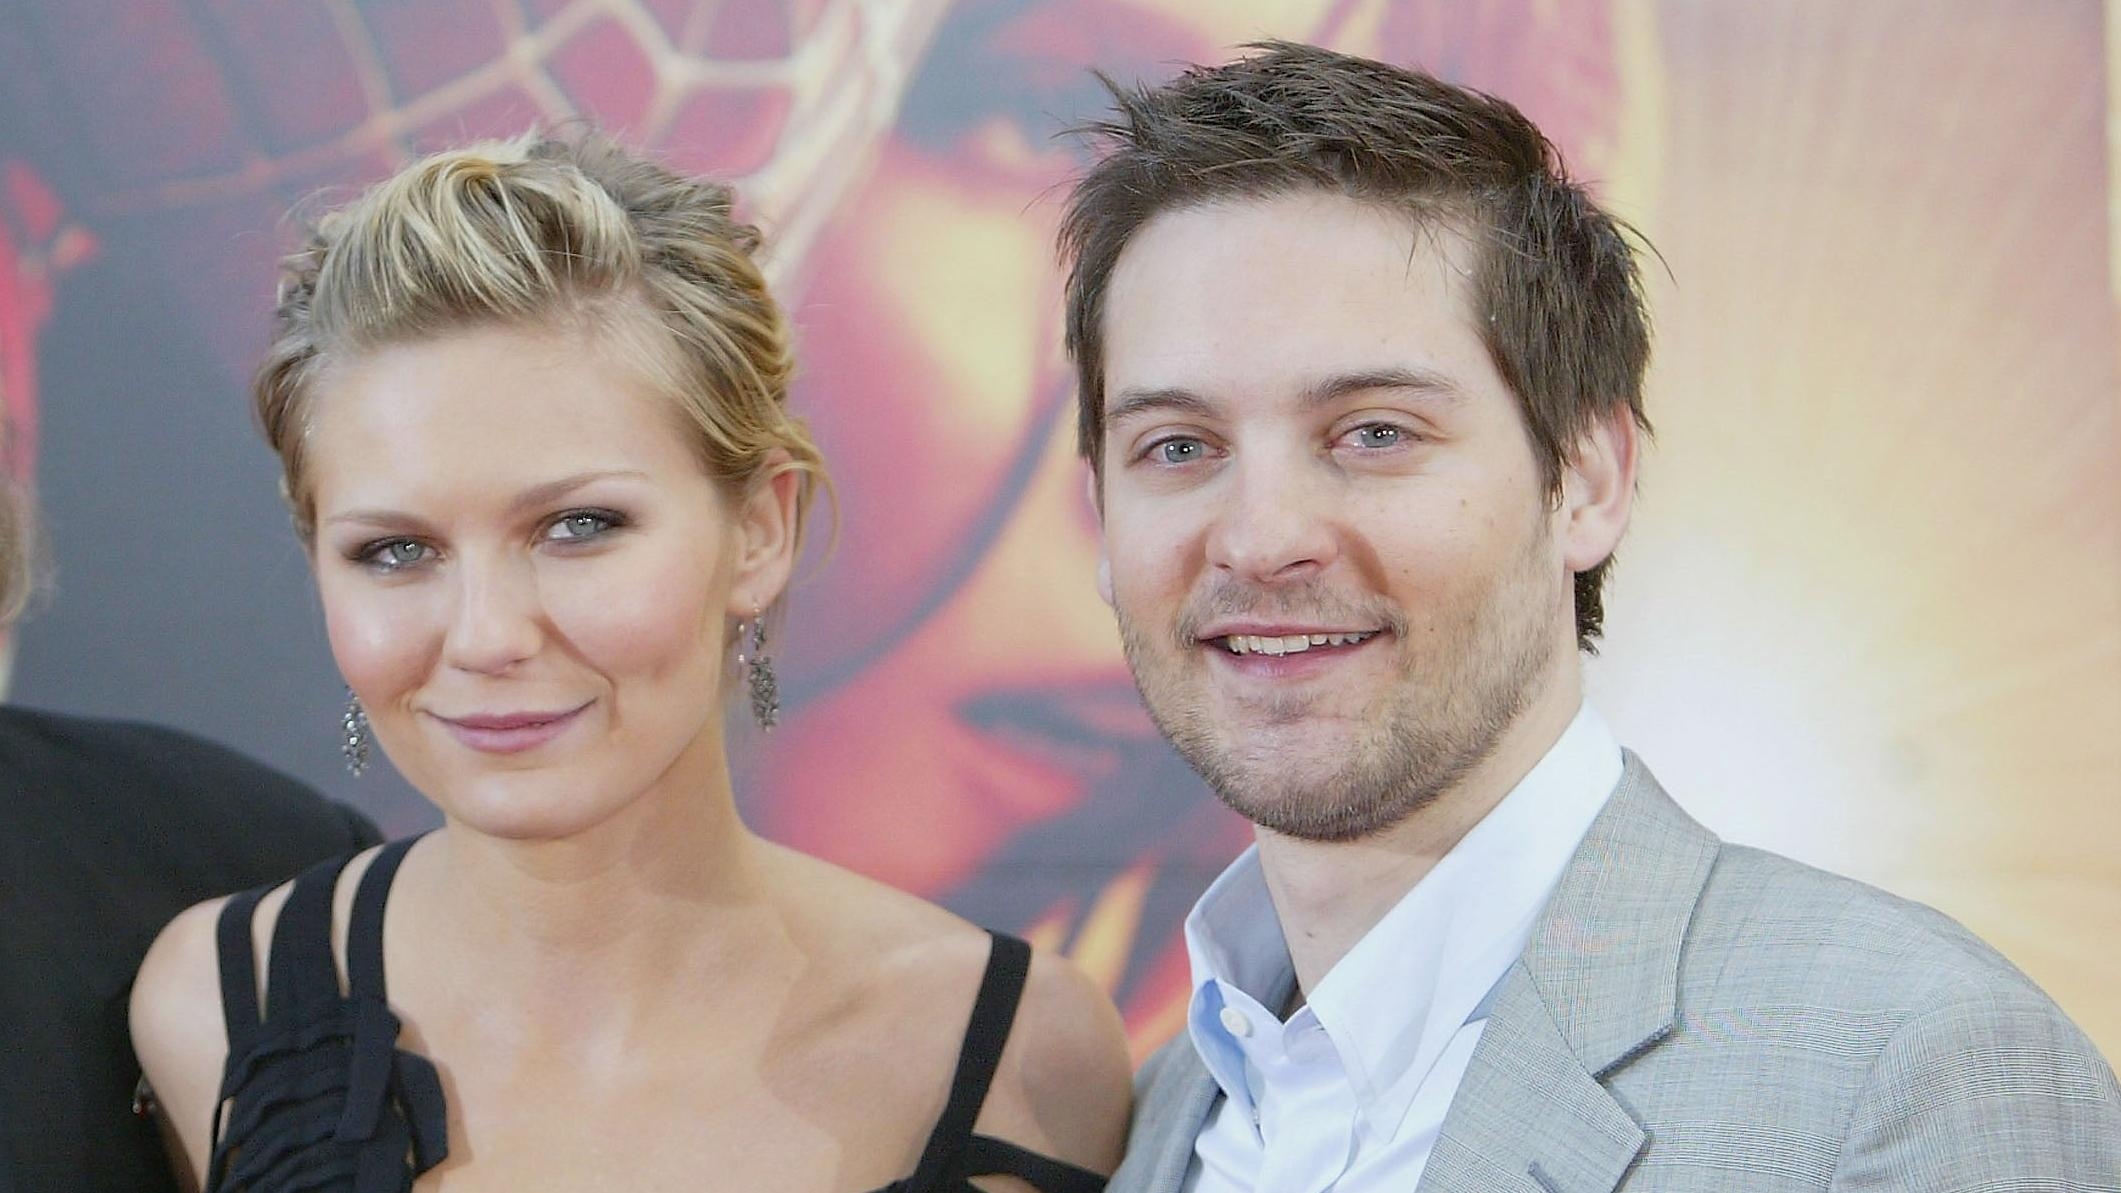 Kirsten Dunst says the disparity between her Spider-Man salary and Tobey Maguire’s was “very extreme”